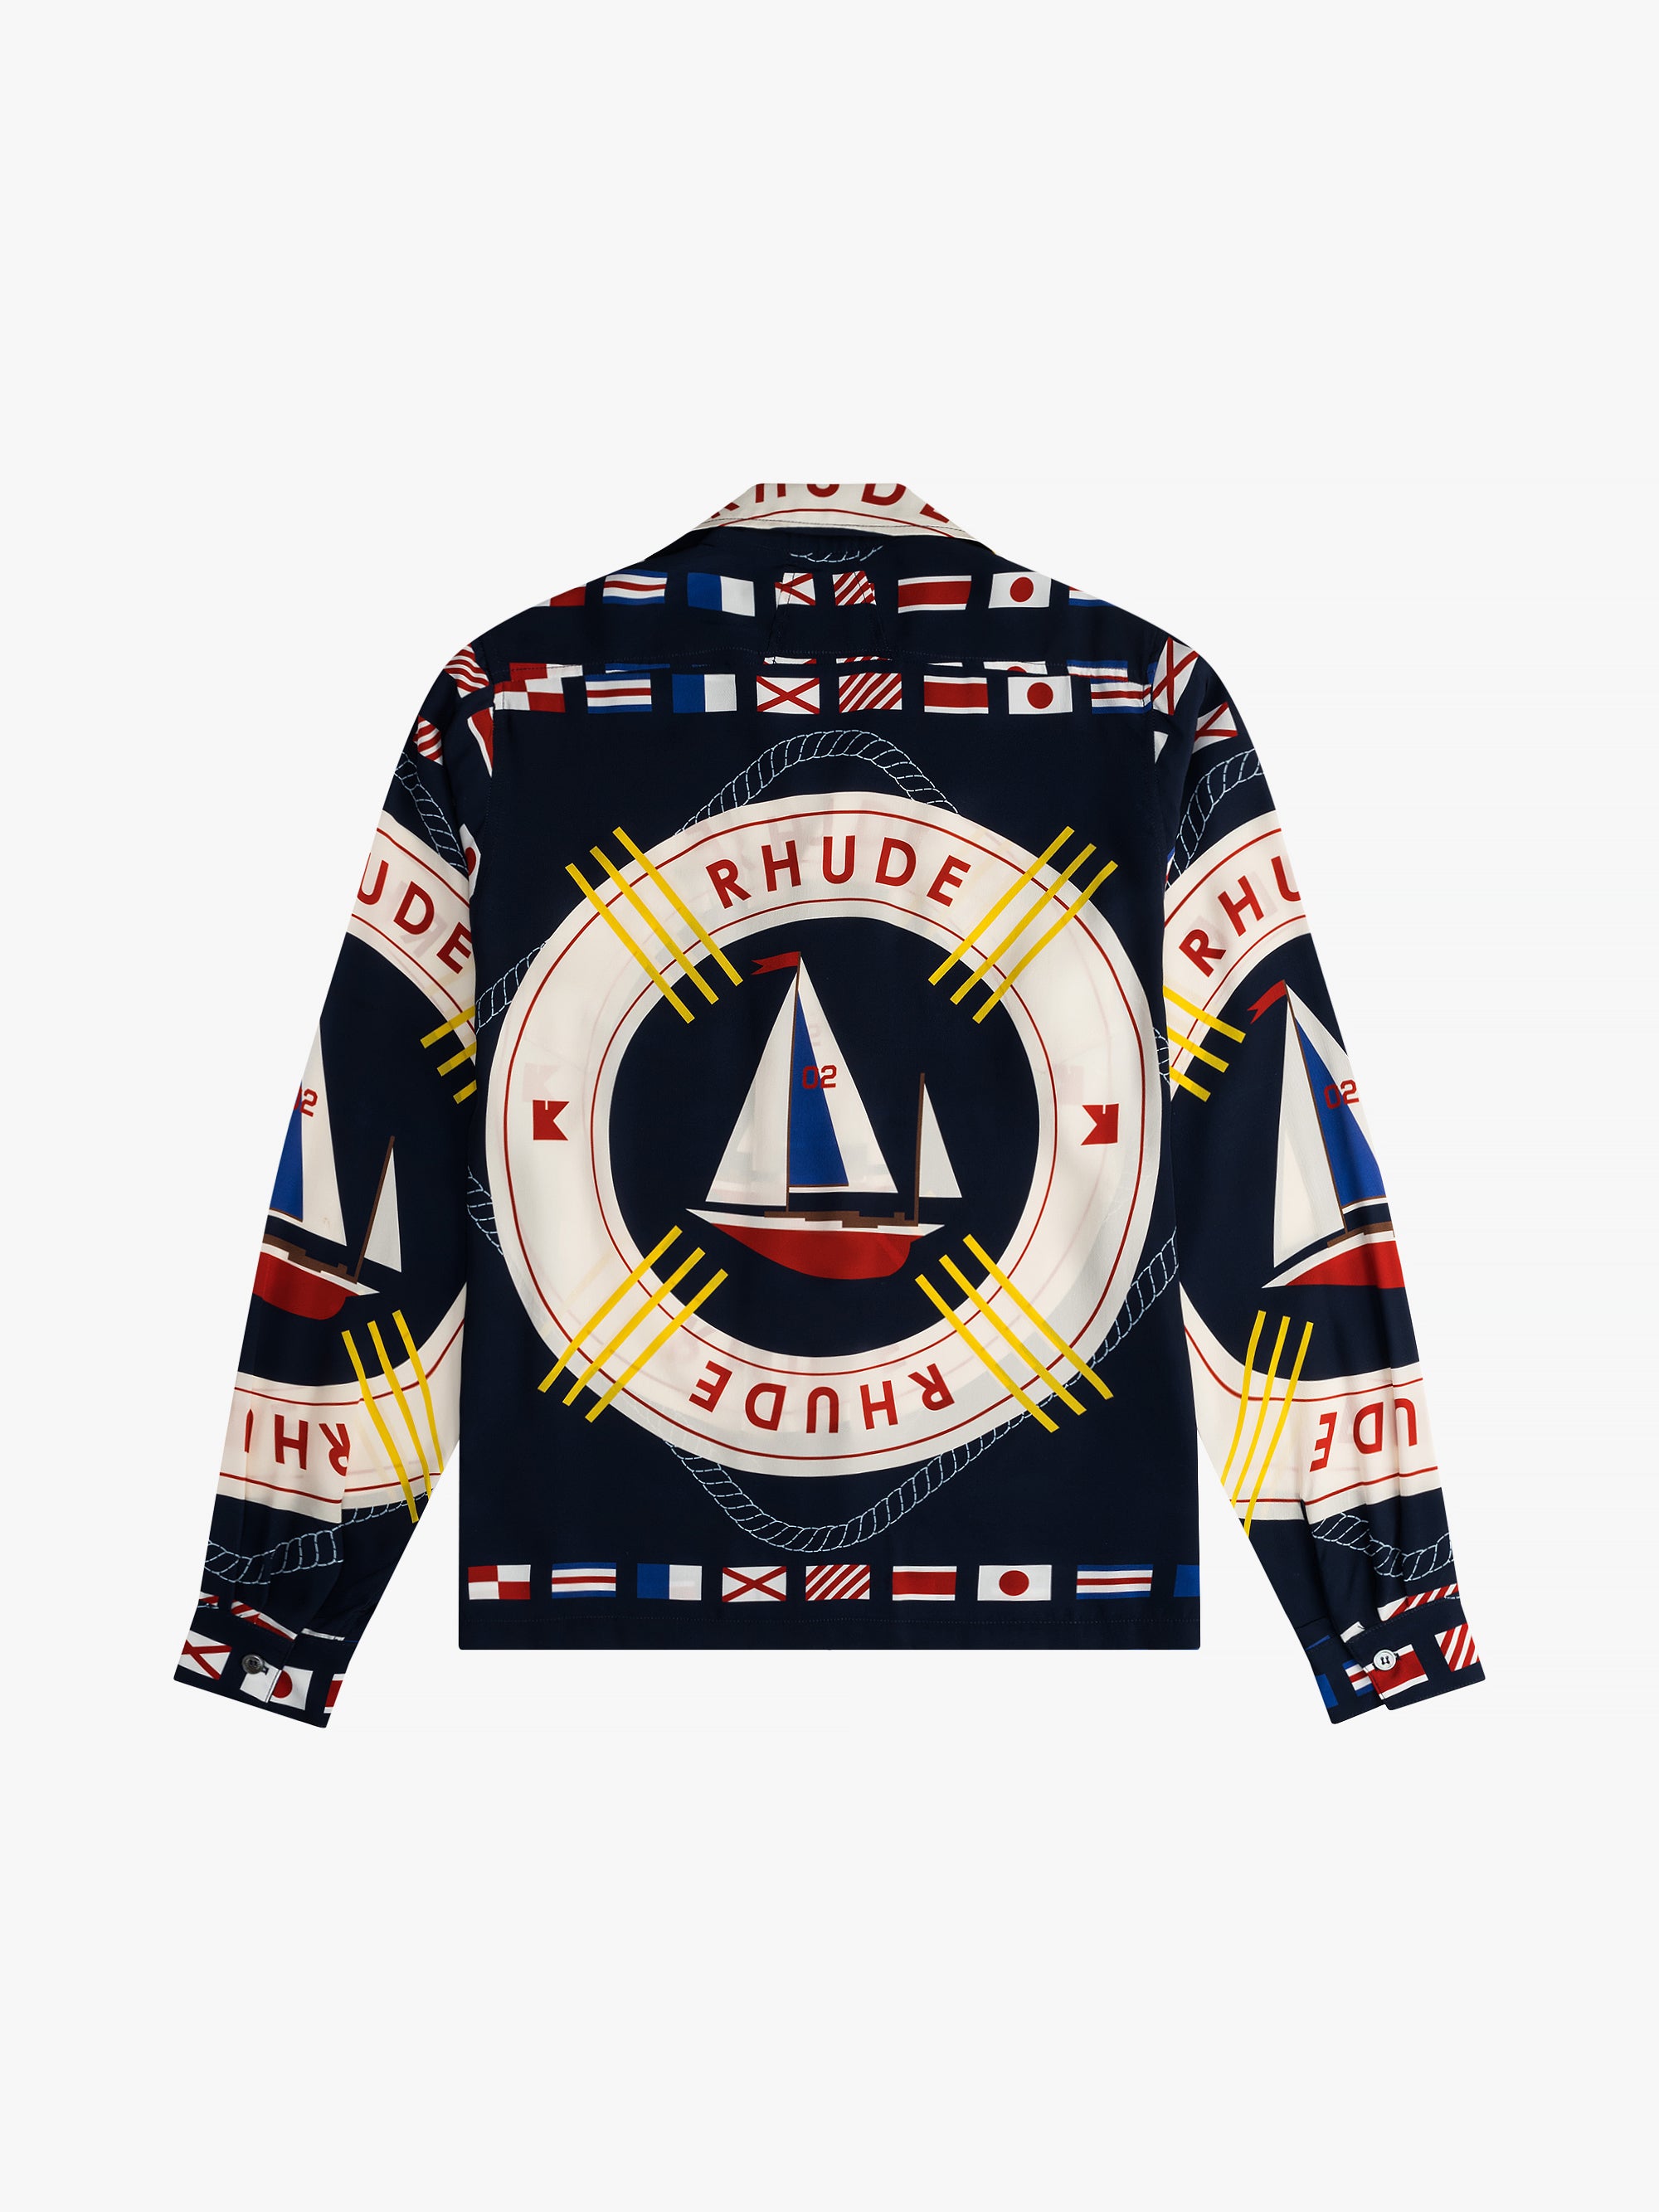 Rhude - KNITTED TRACK JACKET  HBX - Globally Curated Fashion and Lifestyle  by Hypebeast